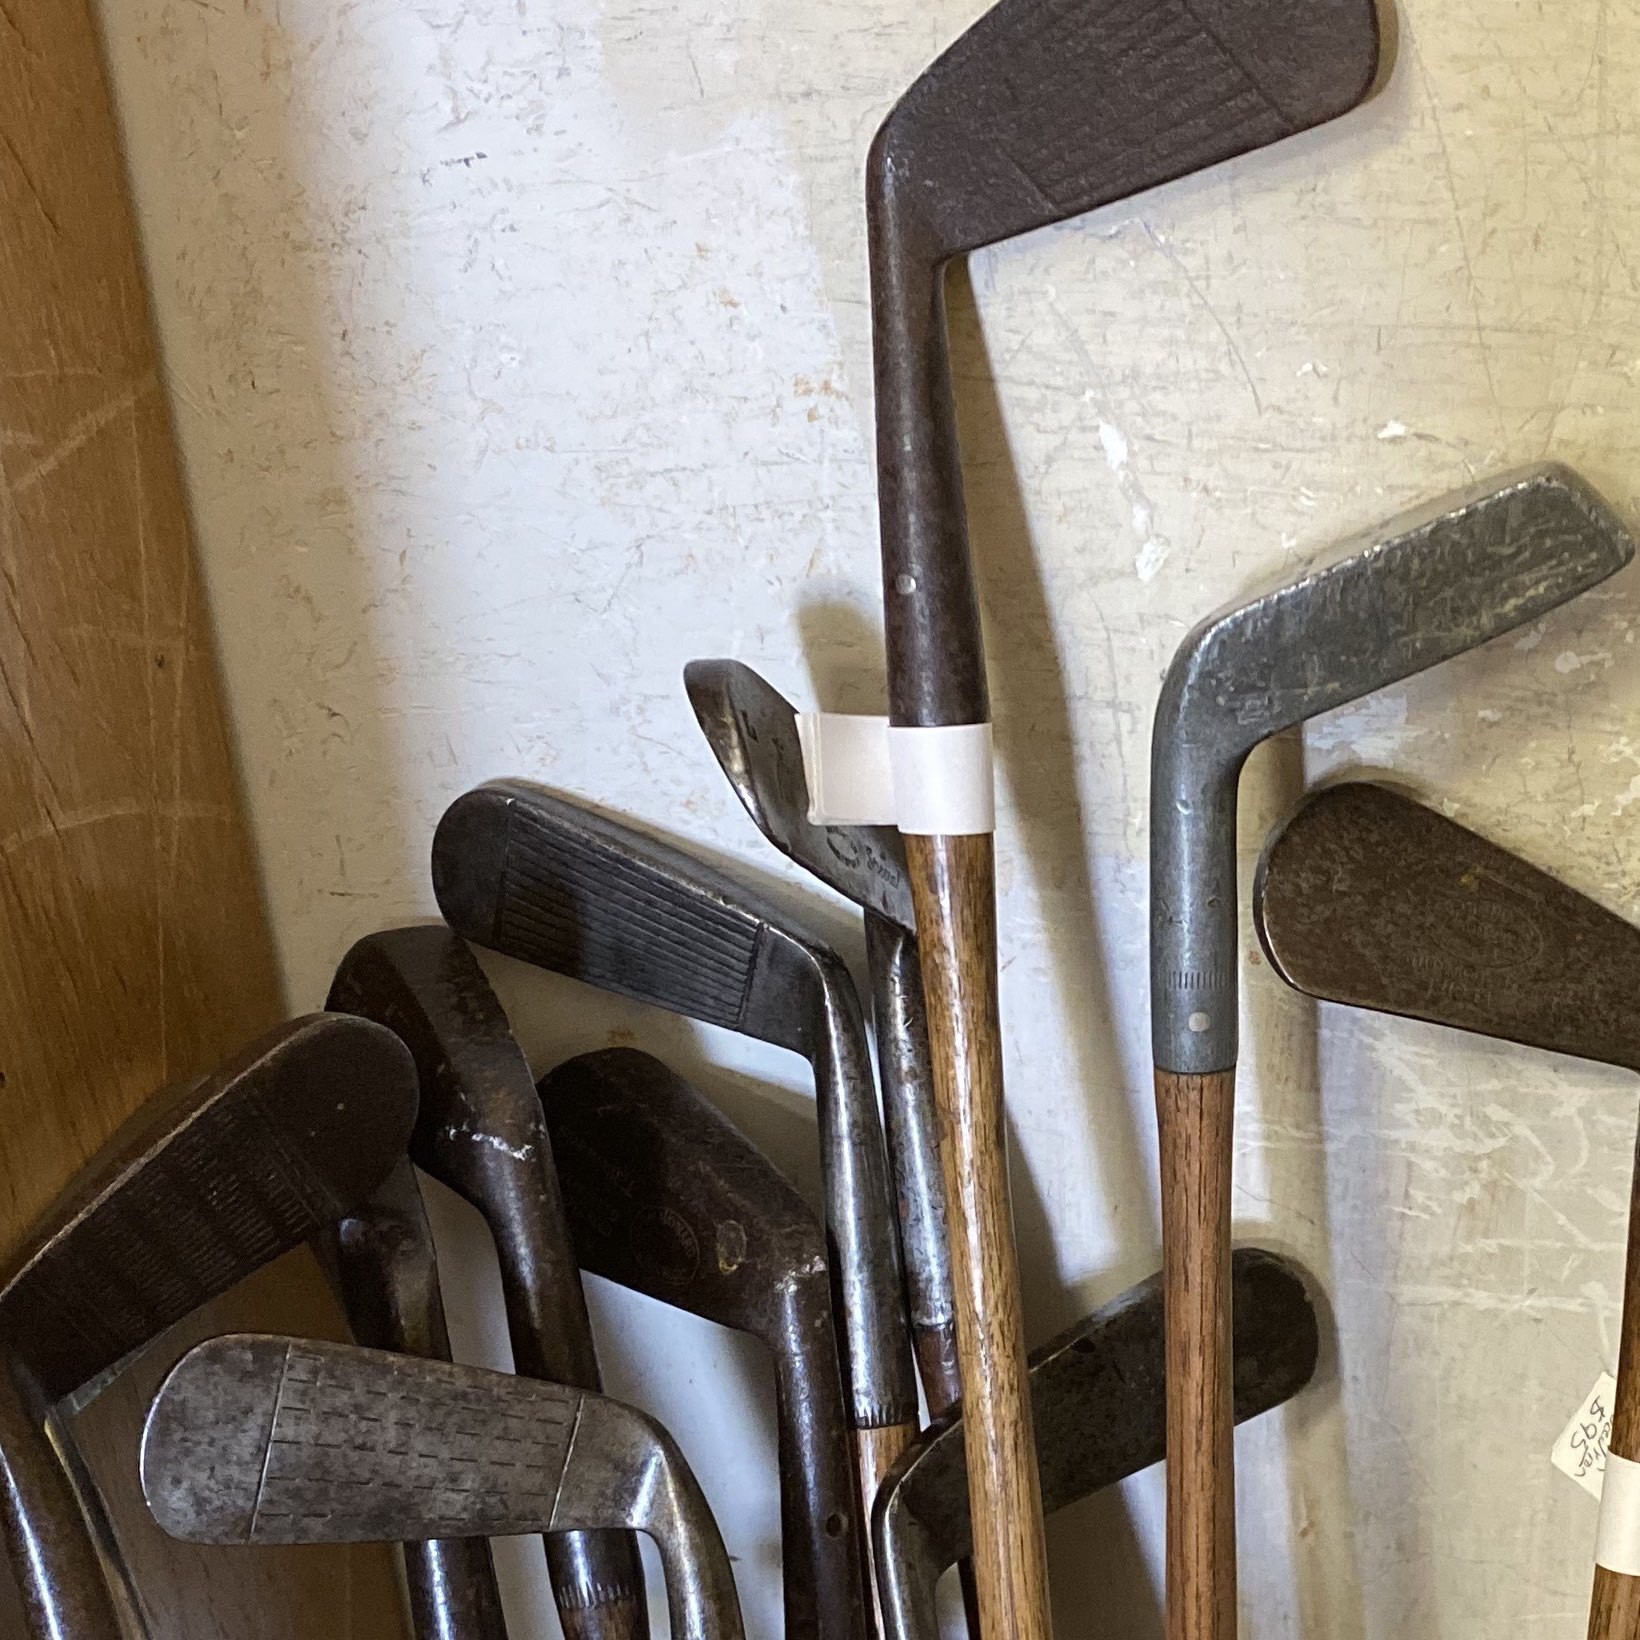 Eleven old golf clubs